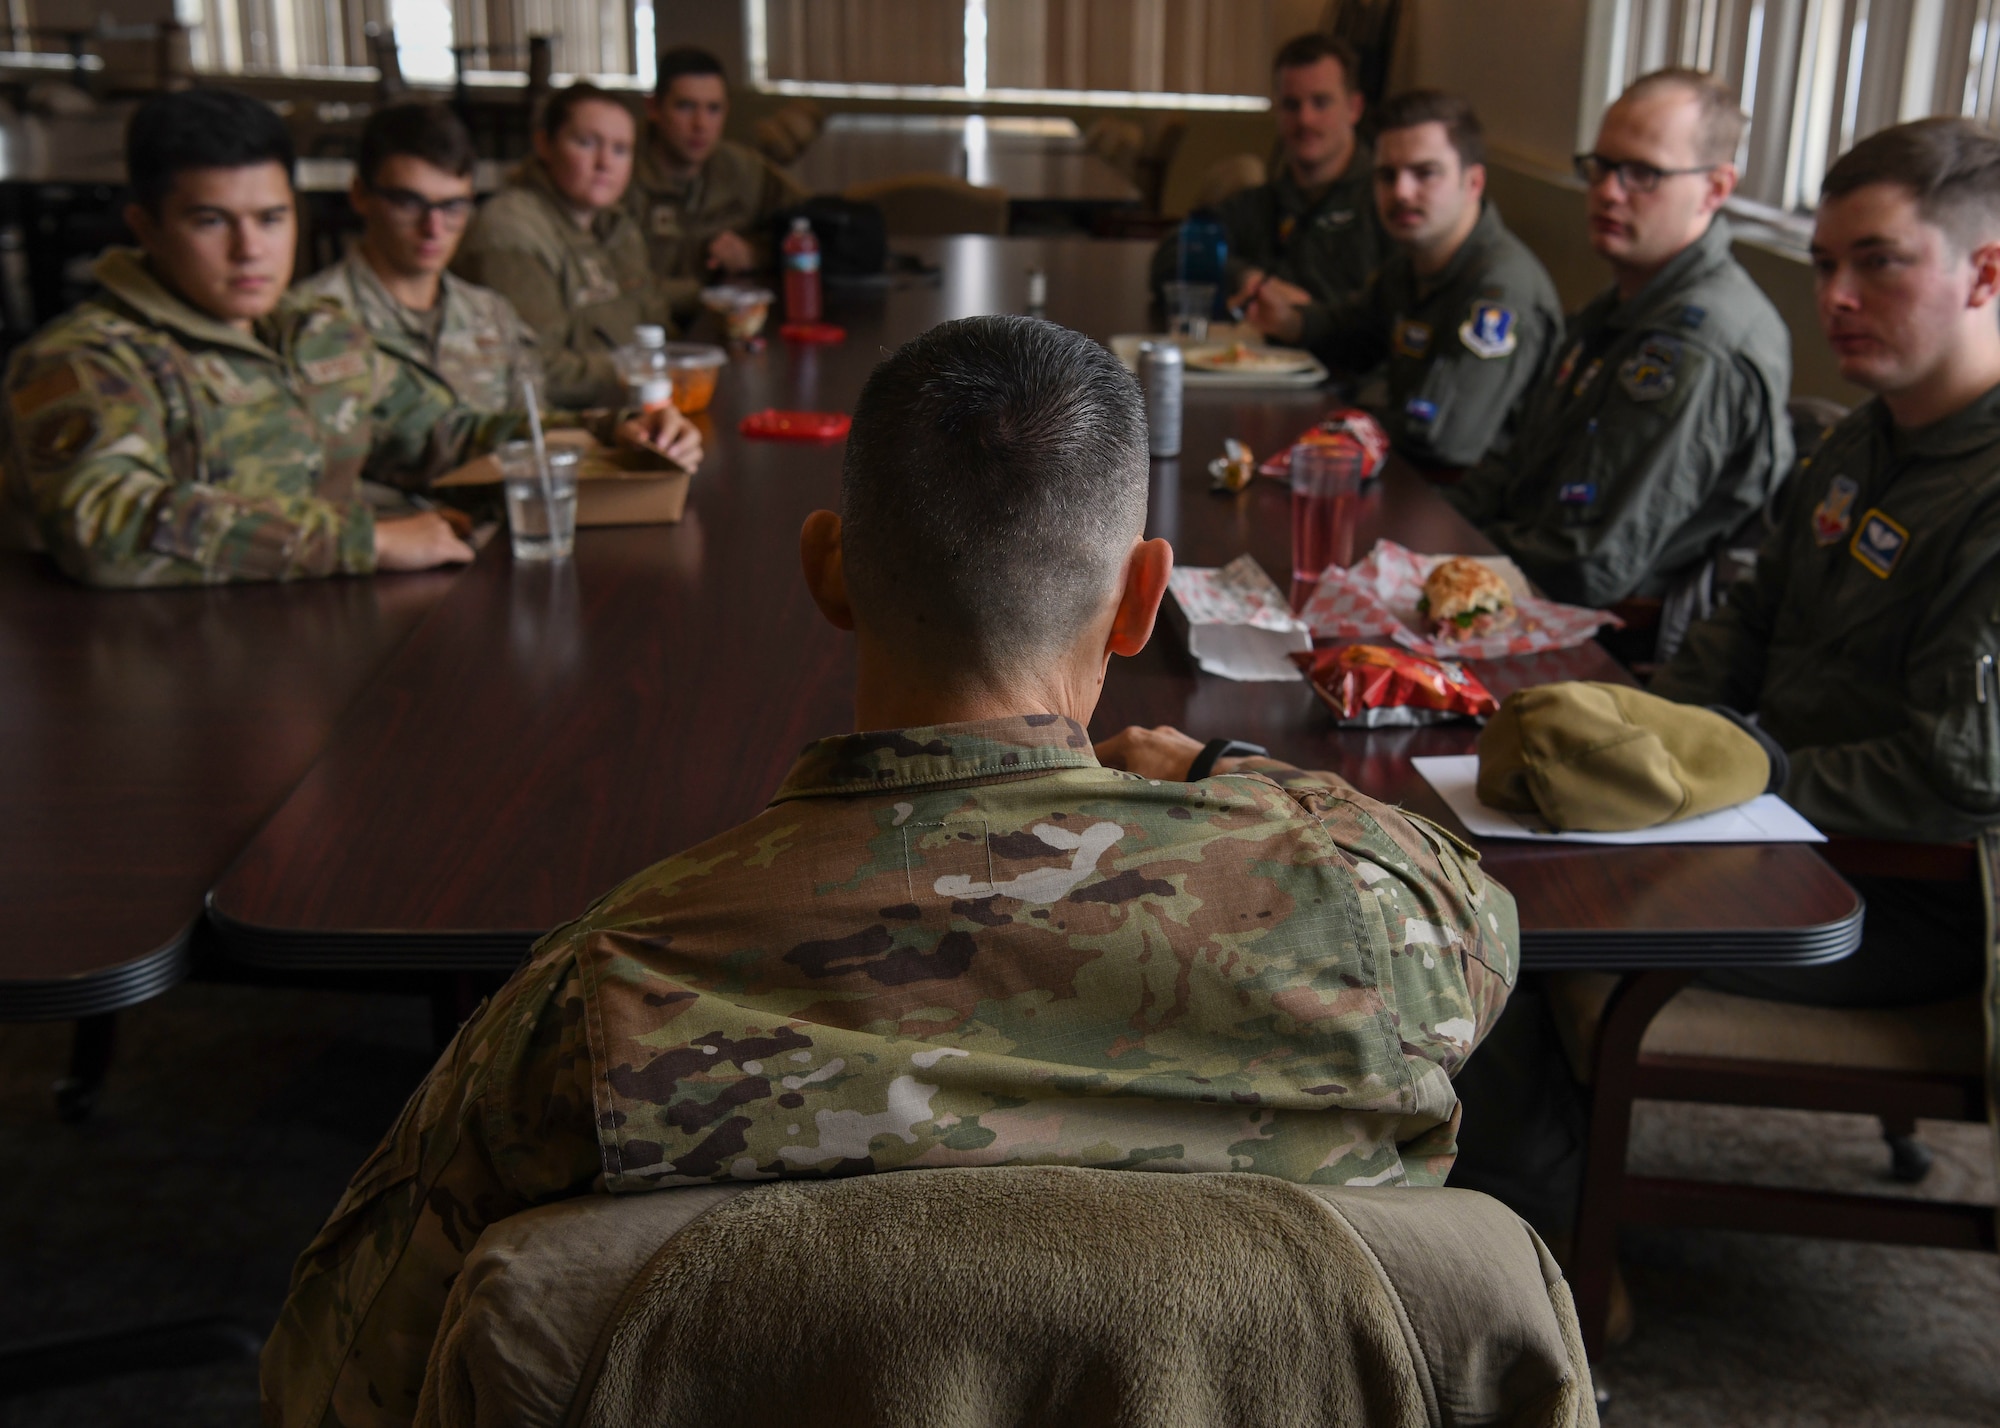 People in green uniforms sit around a table.